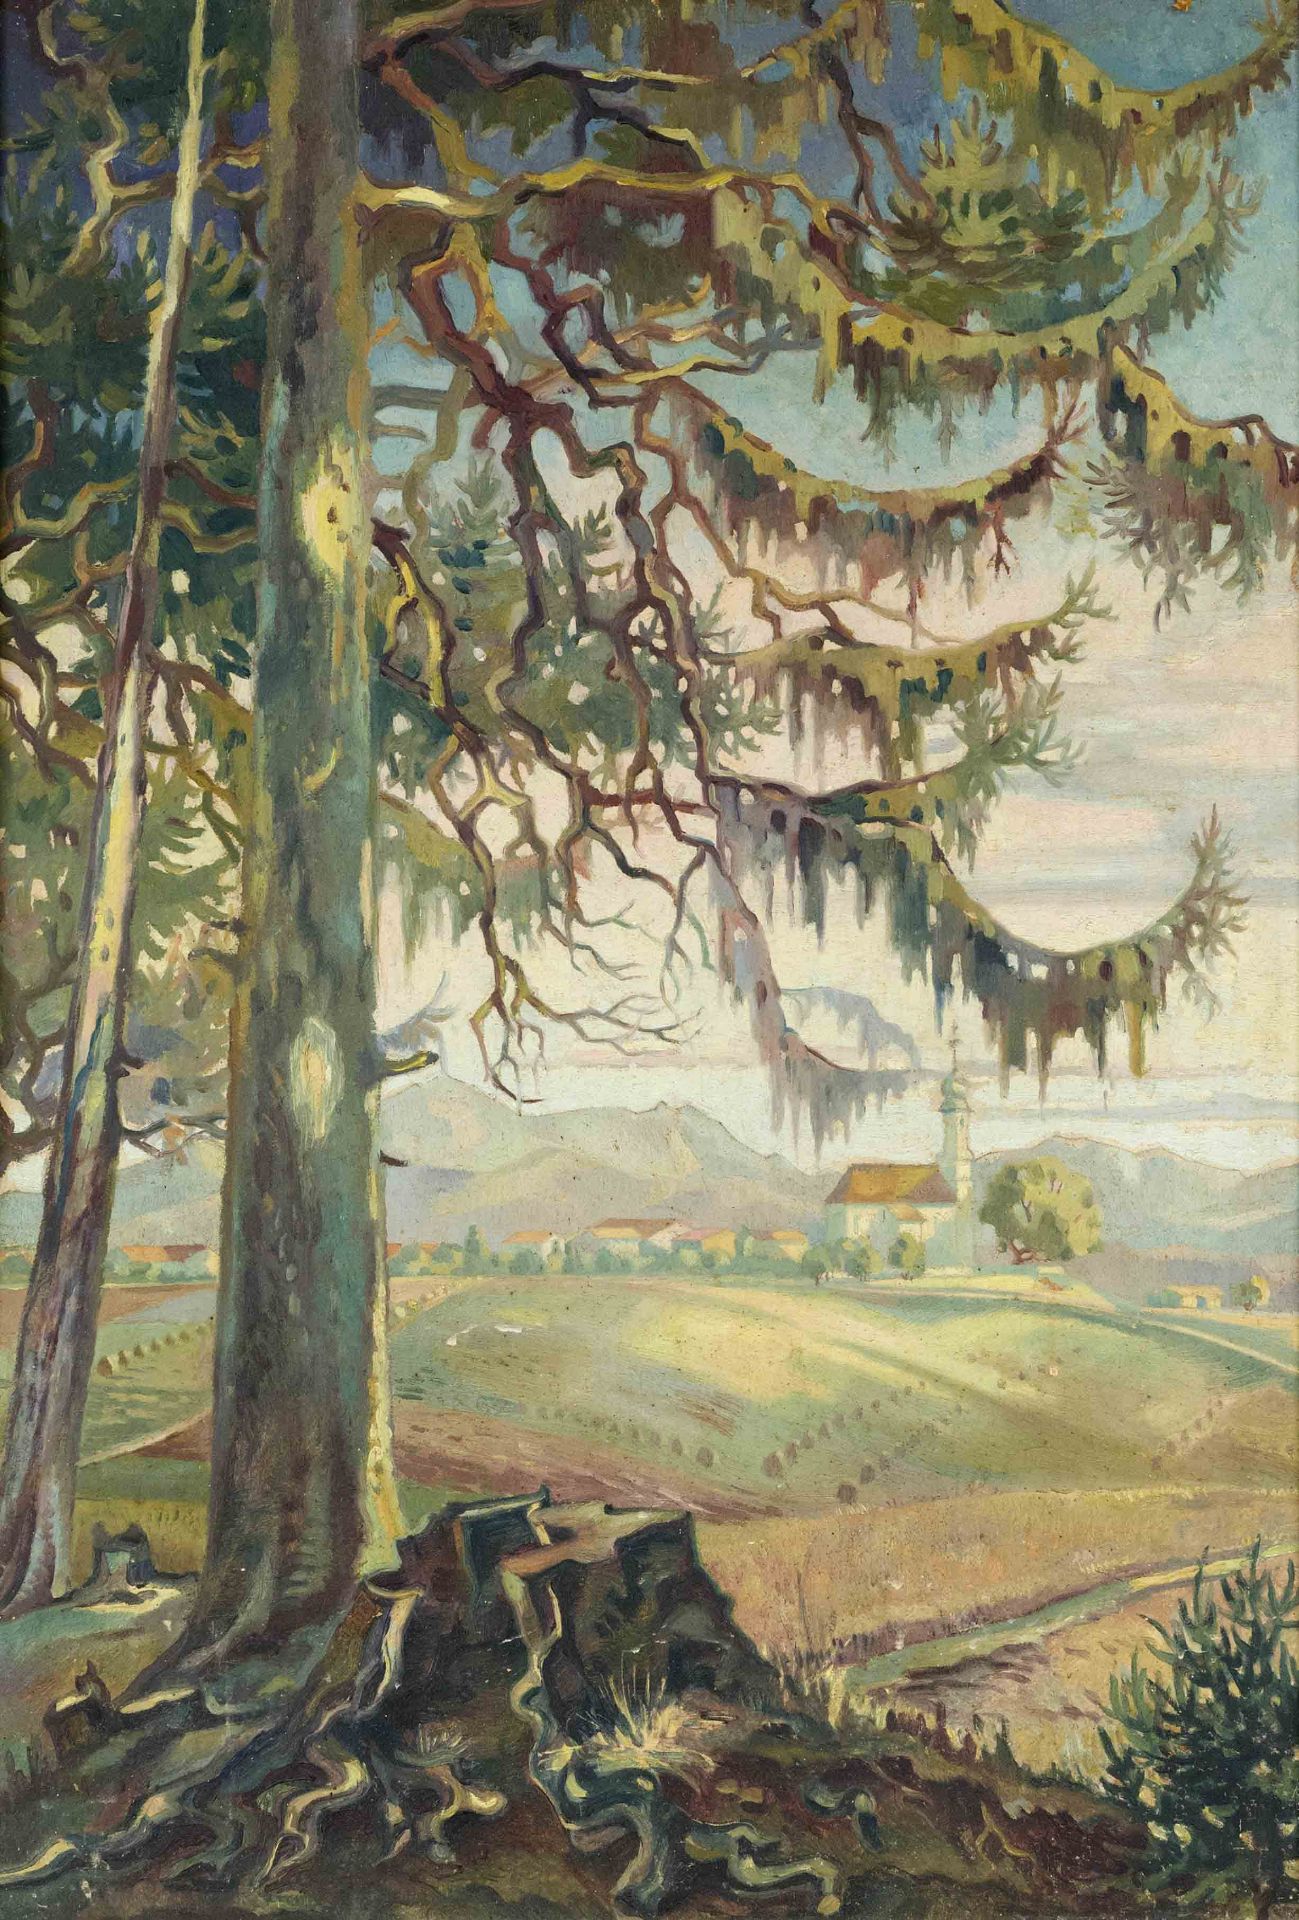 Anonymous painter, c. 1910, View from the edge of a forest over a Bavarian landscape, oil on